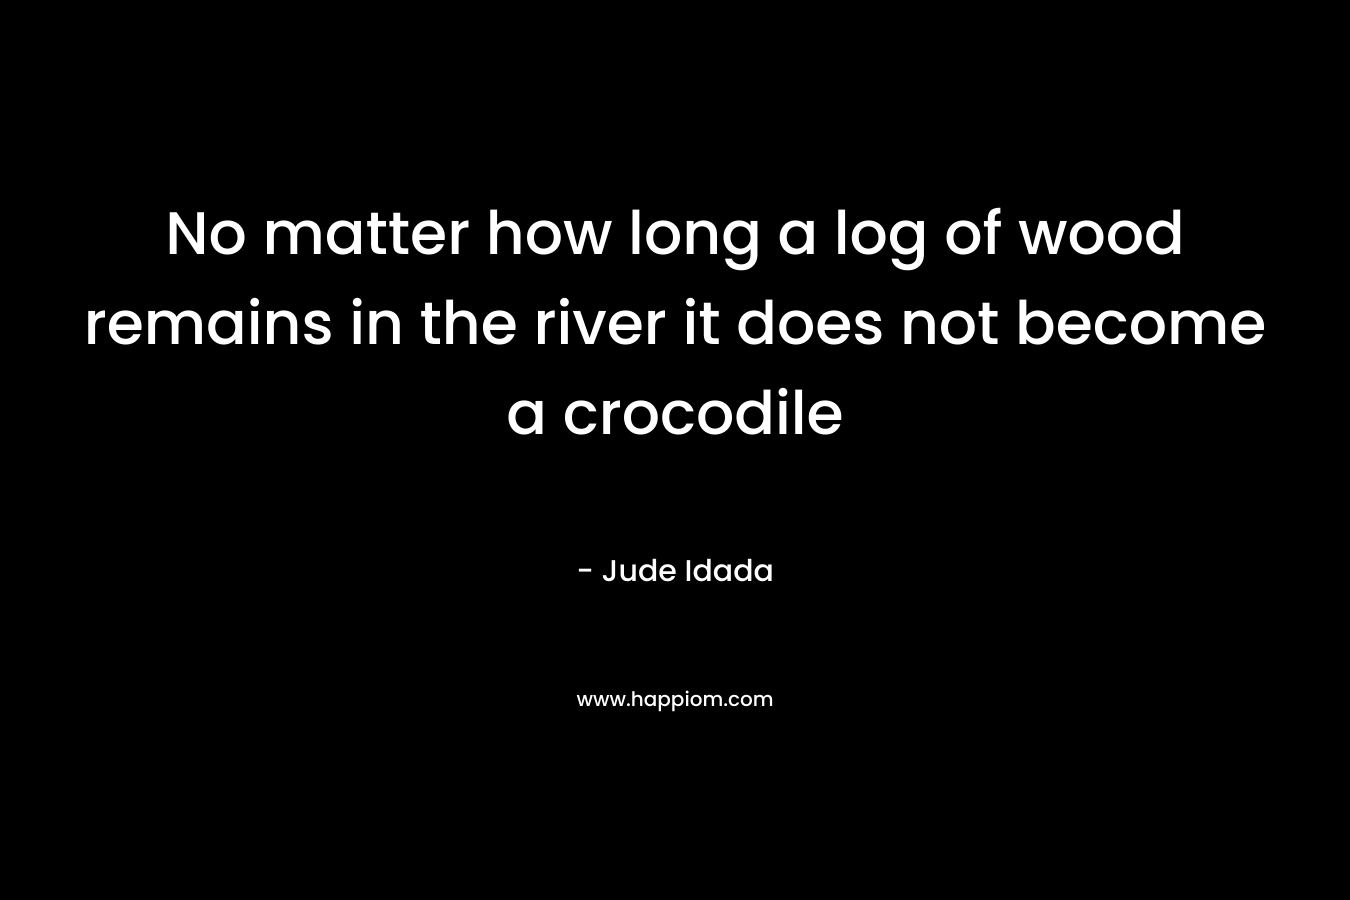 No matter how long a log of wood remains in the river it does not become a crocodile – Jude Idada